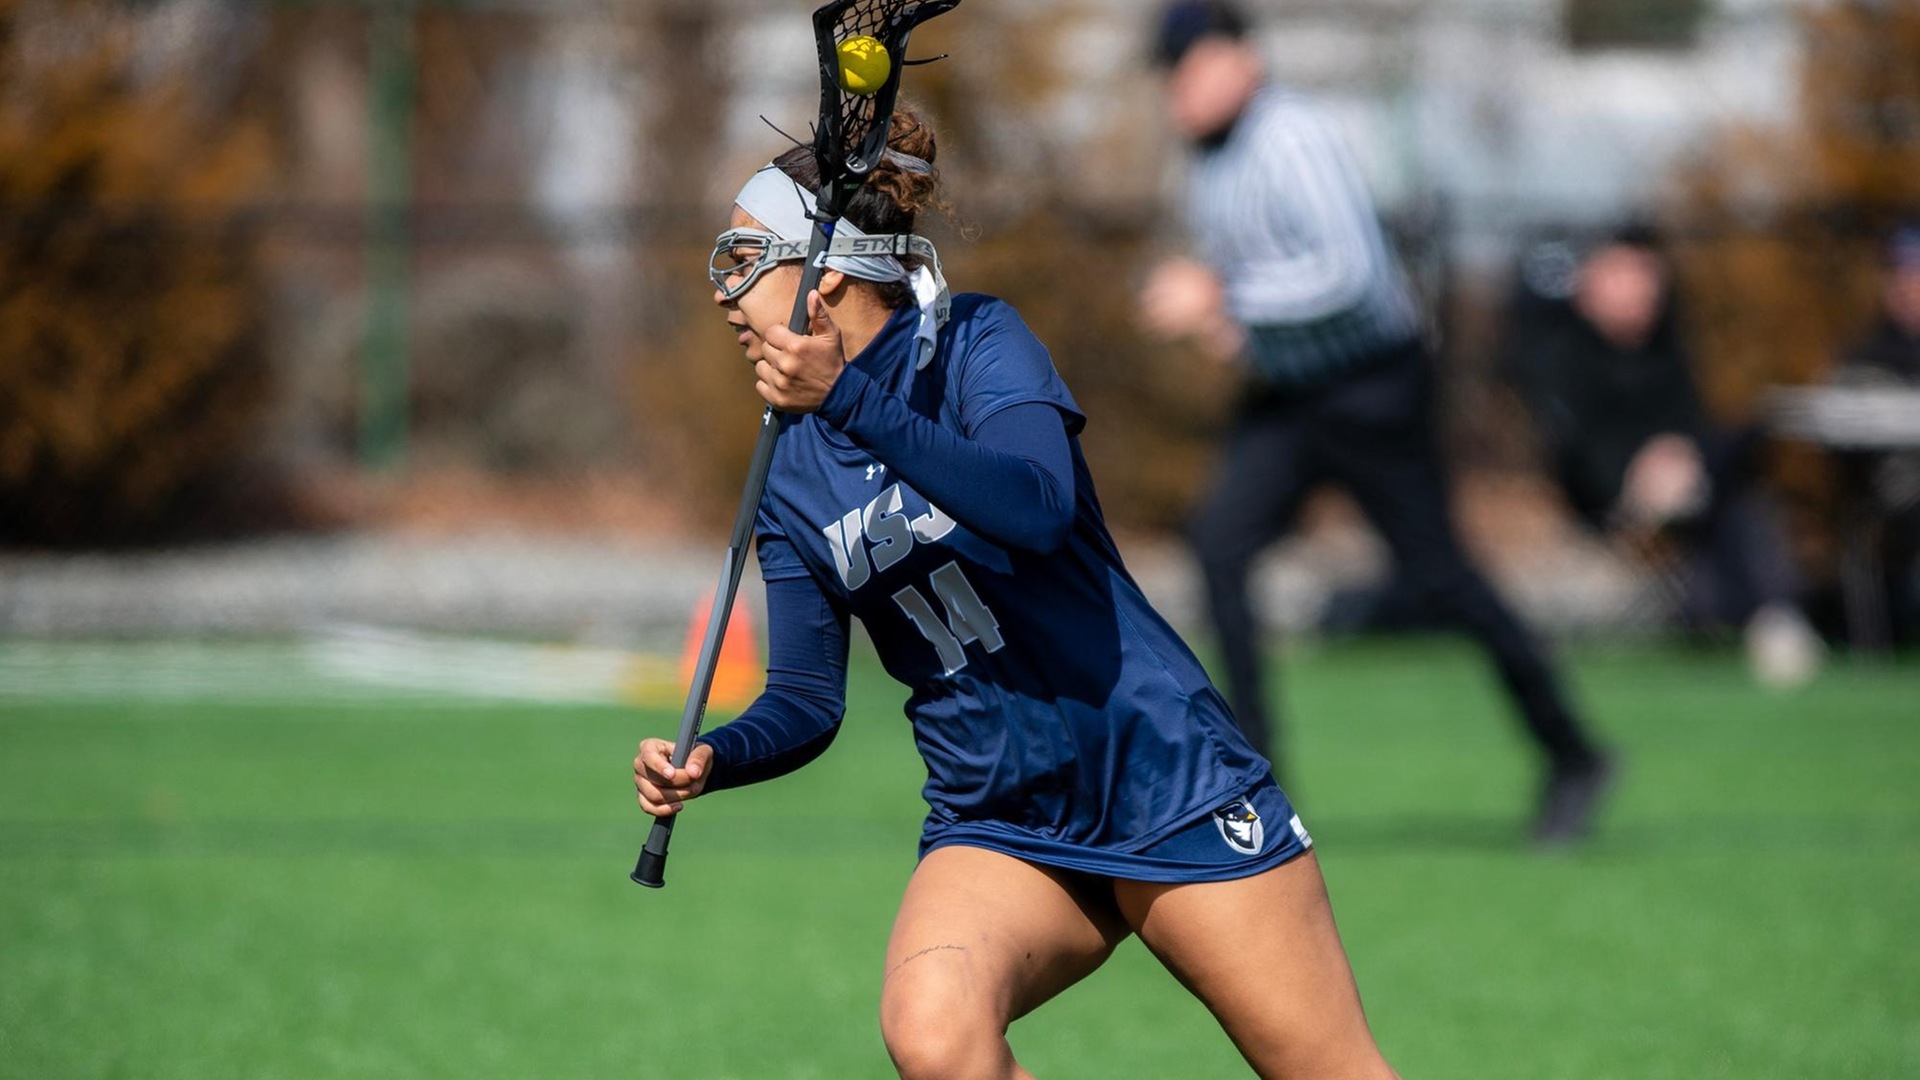 Women's Lacrosse Comes From Behind, Secures 13-12 Victory at Lasell Wednesday